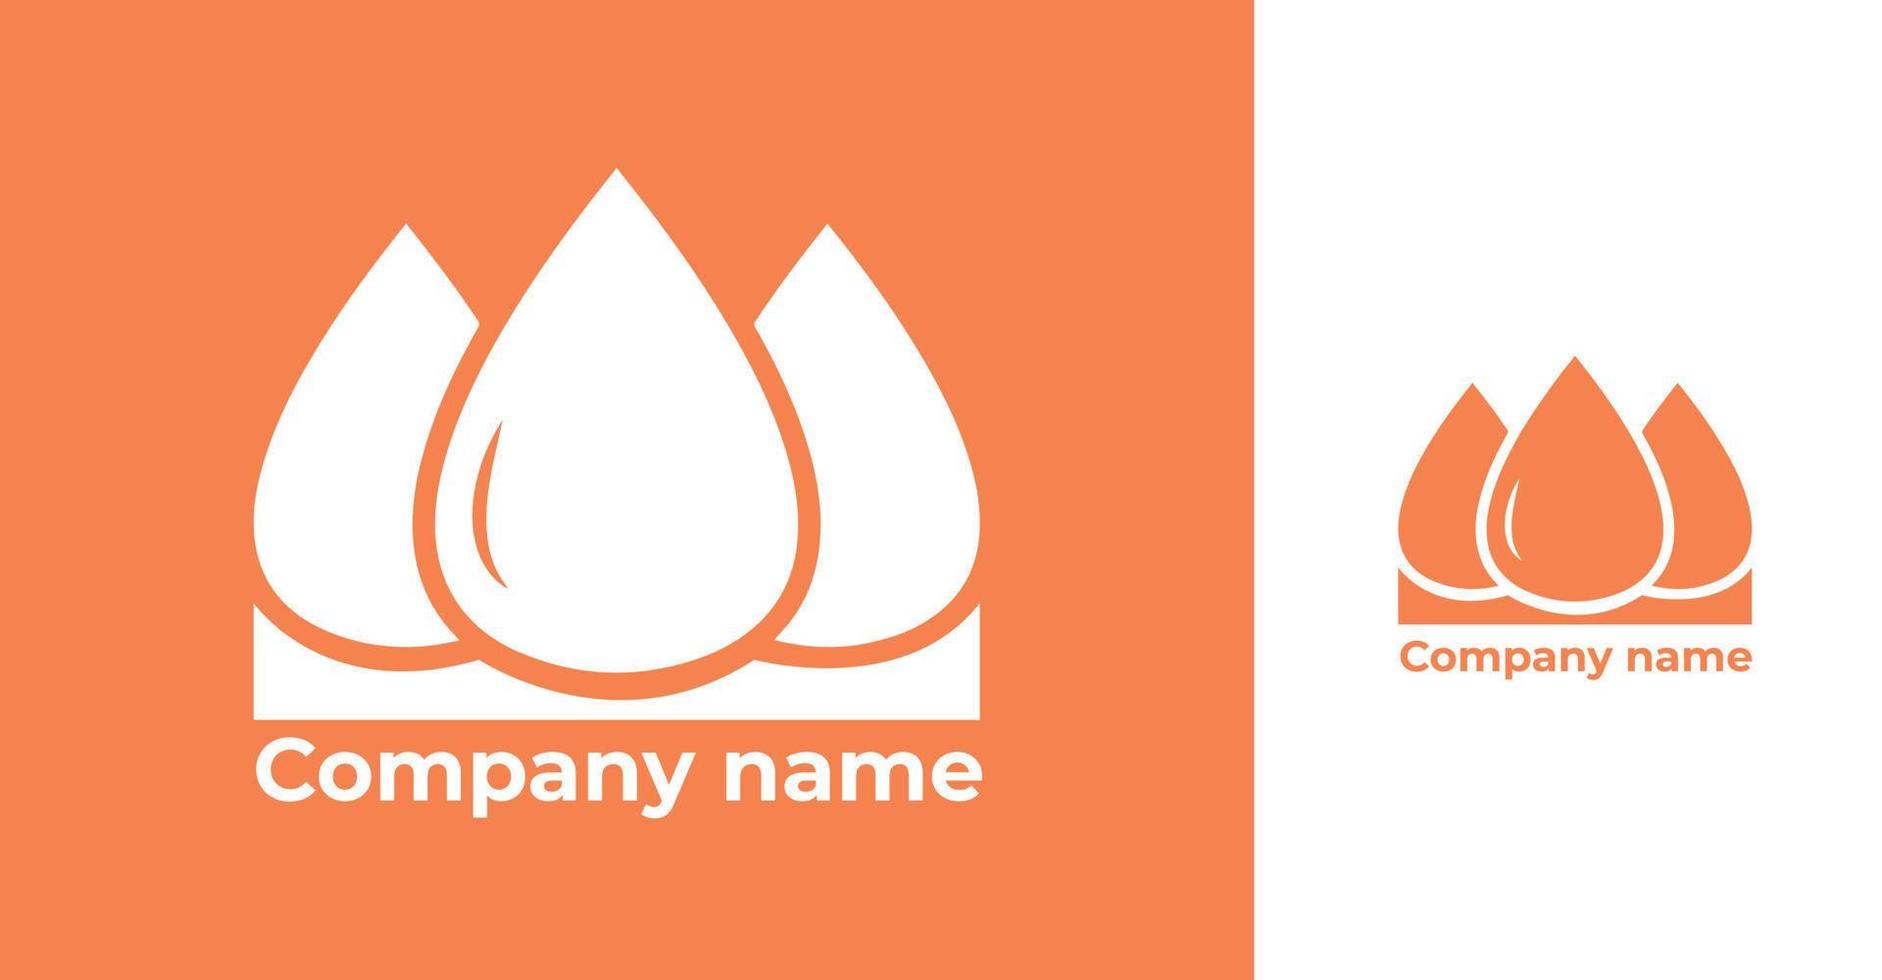 Crown shaped food symbol in orange and white colors vector